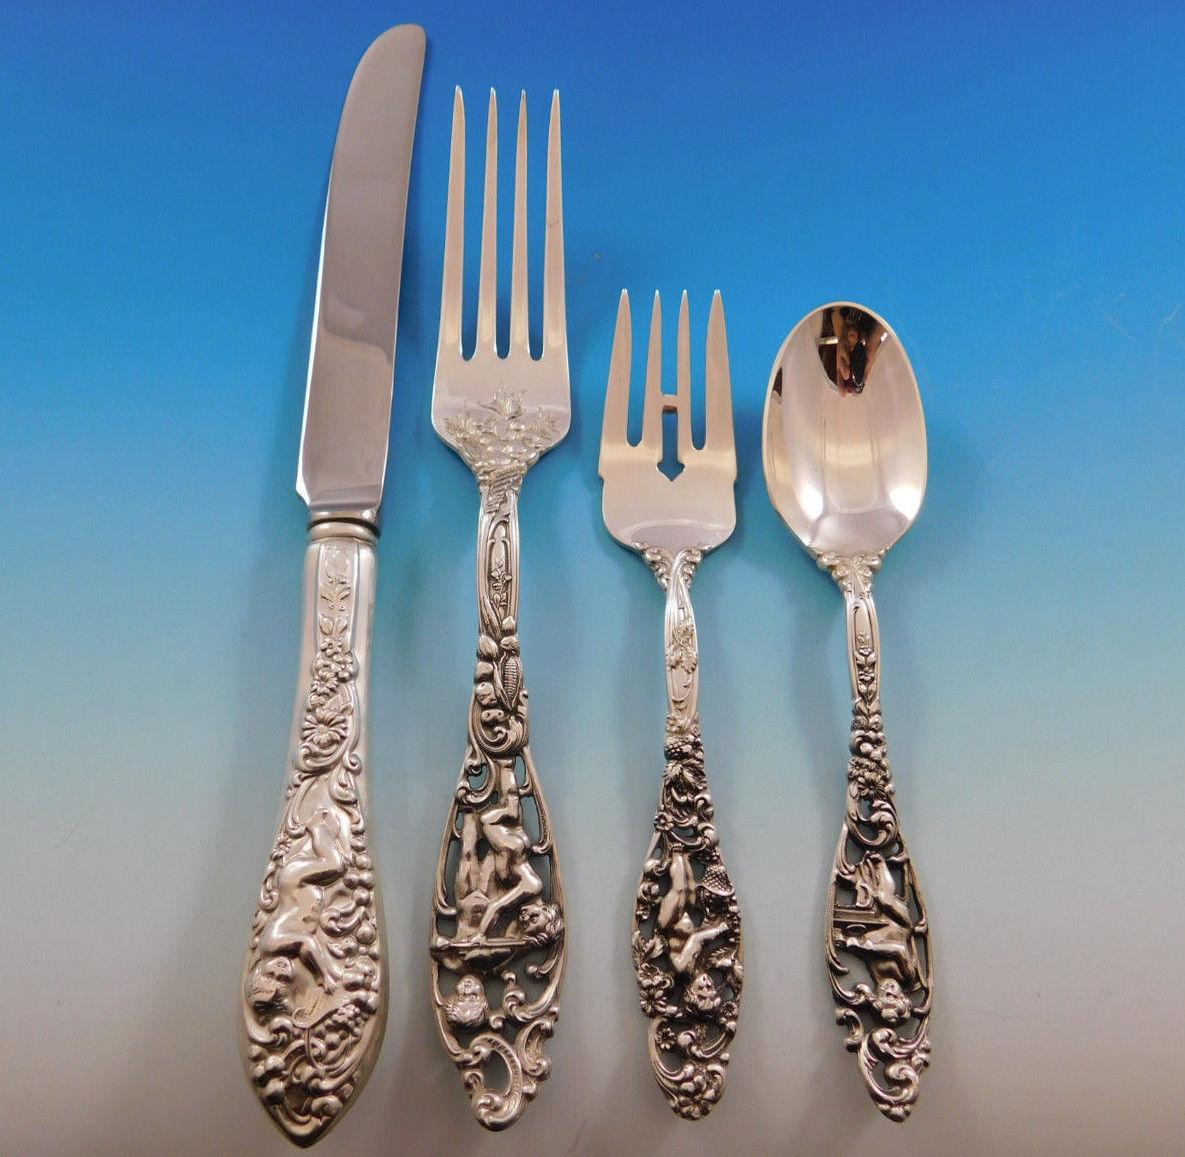 Outstanding sinner size labors of Cupid by Dominick and Haff sterling silver flatware set, 54 pieces. This set includes:

12 dinner size knives, 9 3/4